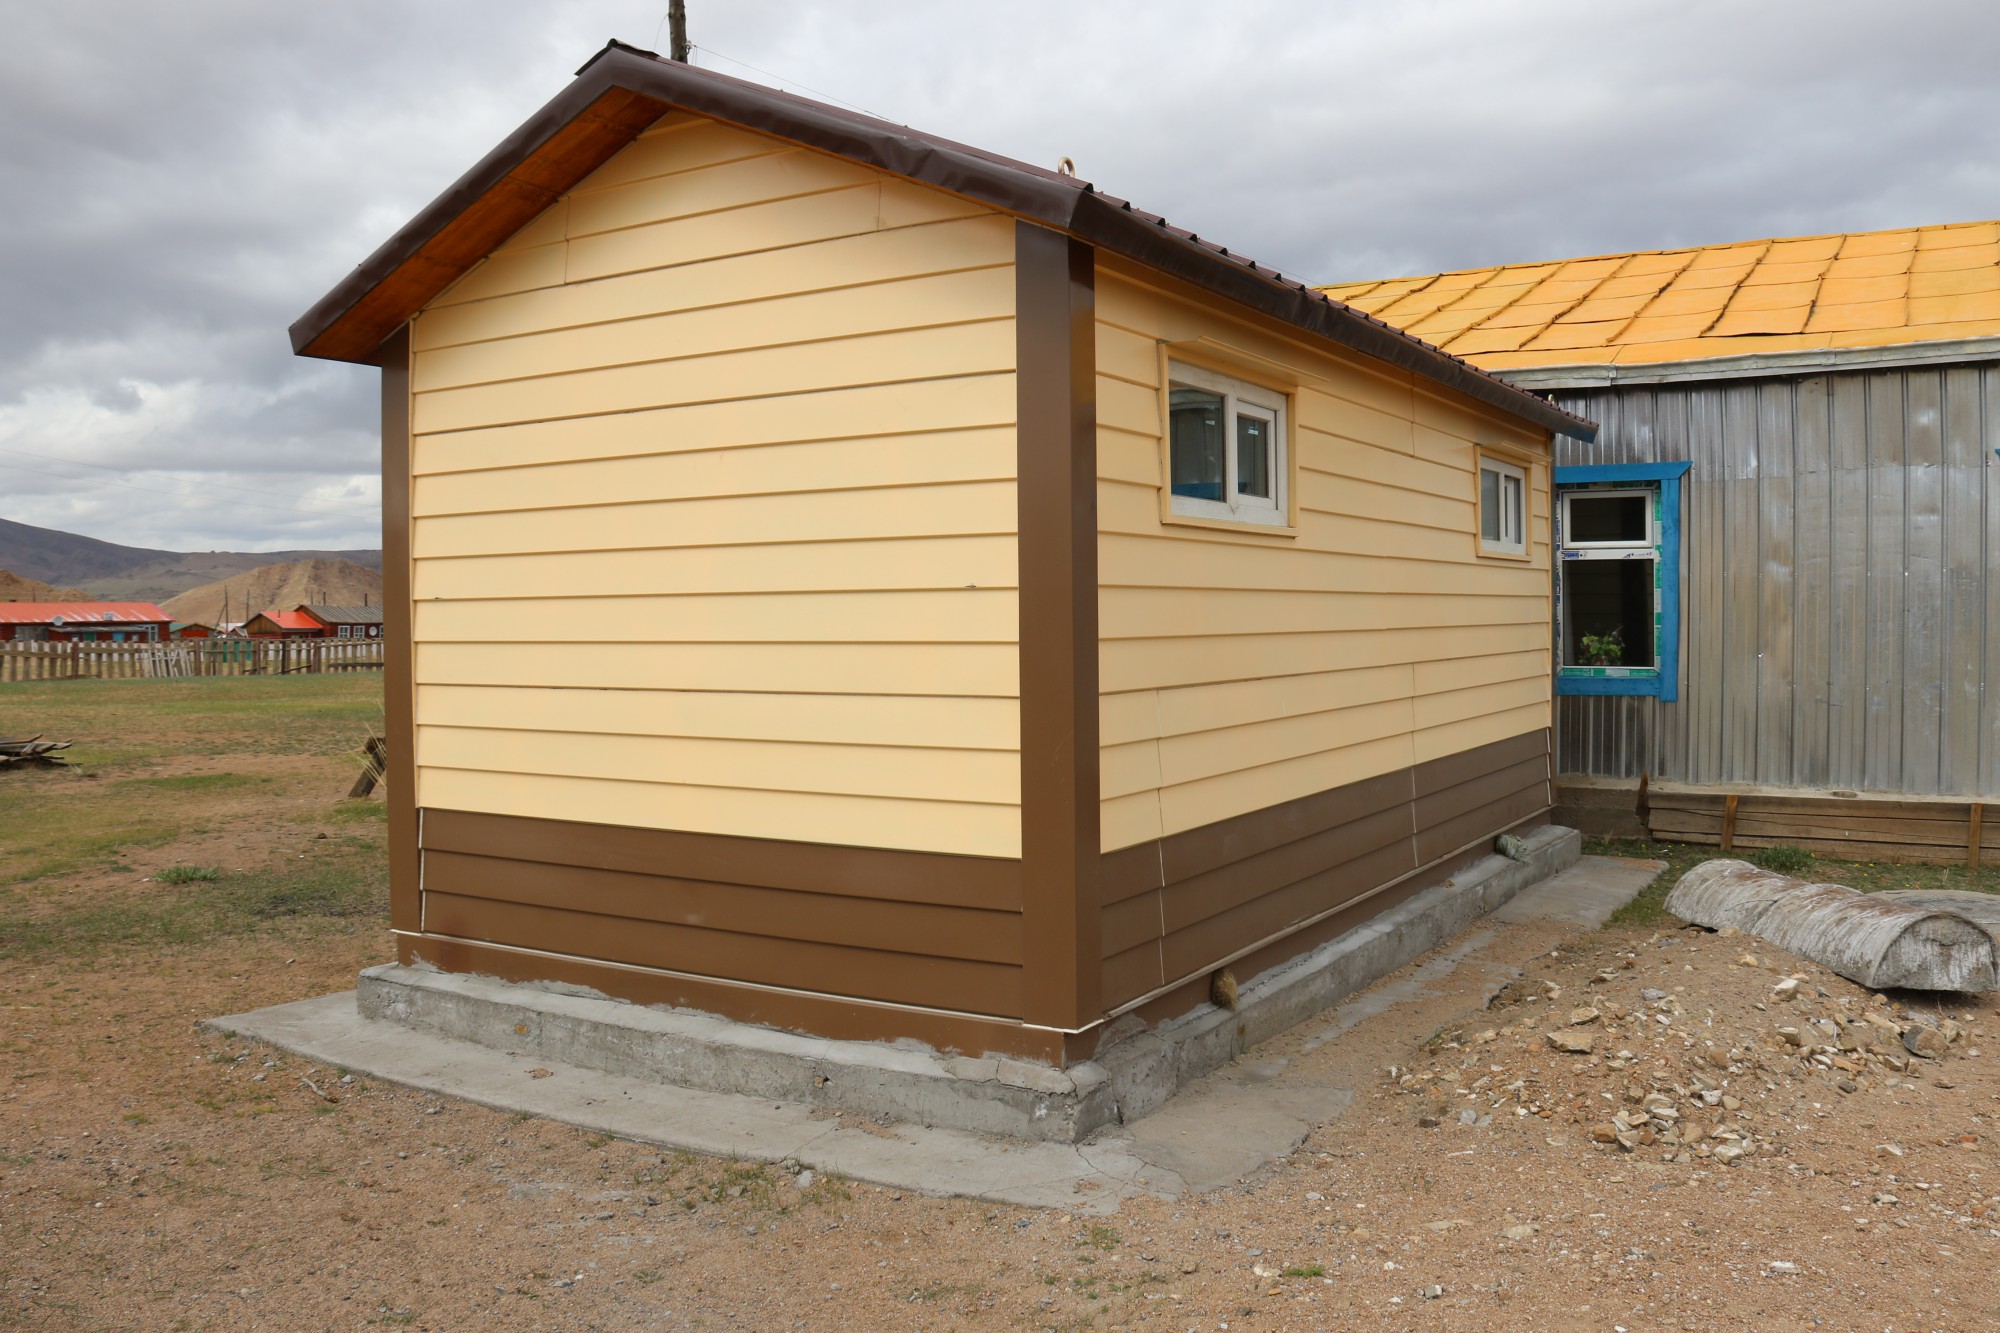 The WASH Container House can be attached to a building or to a ger. If and when the time comes, the WASH Container House can be moved and reattached in a different location making it a sustainable long term investment.